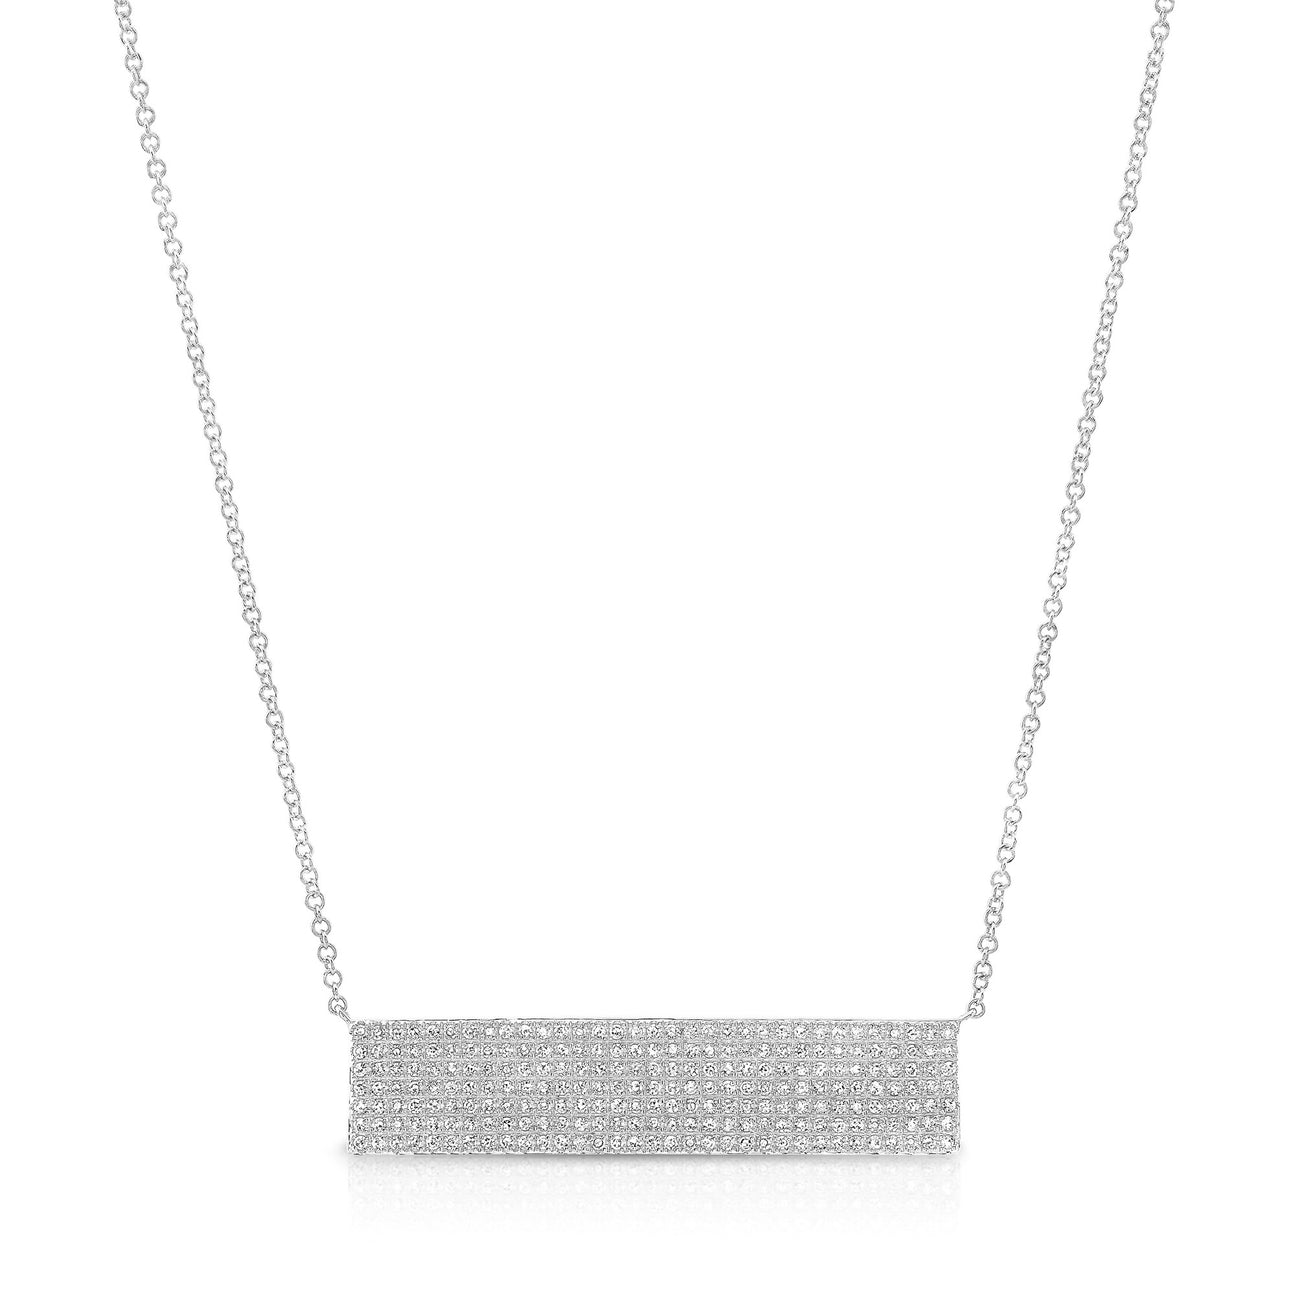 JustDesi Large Pave Bar Necklace in White Gold